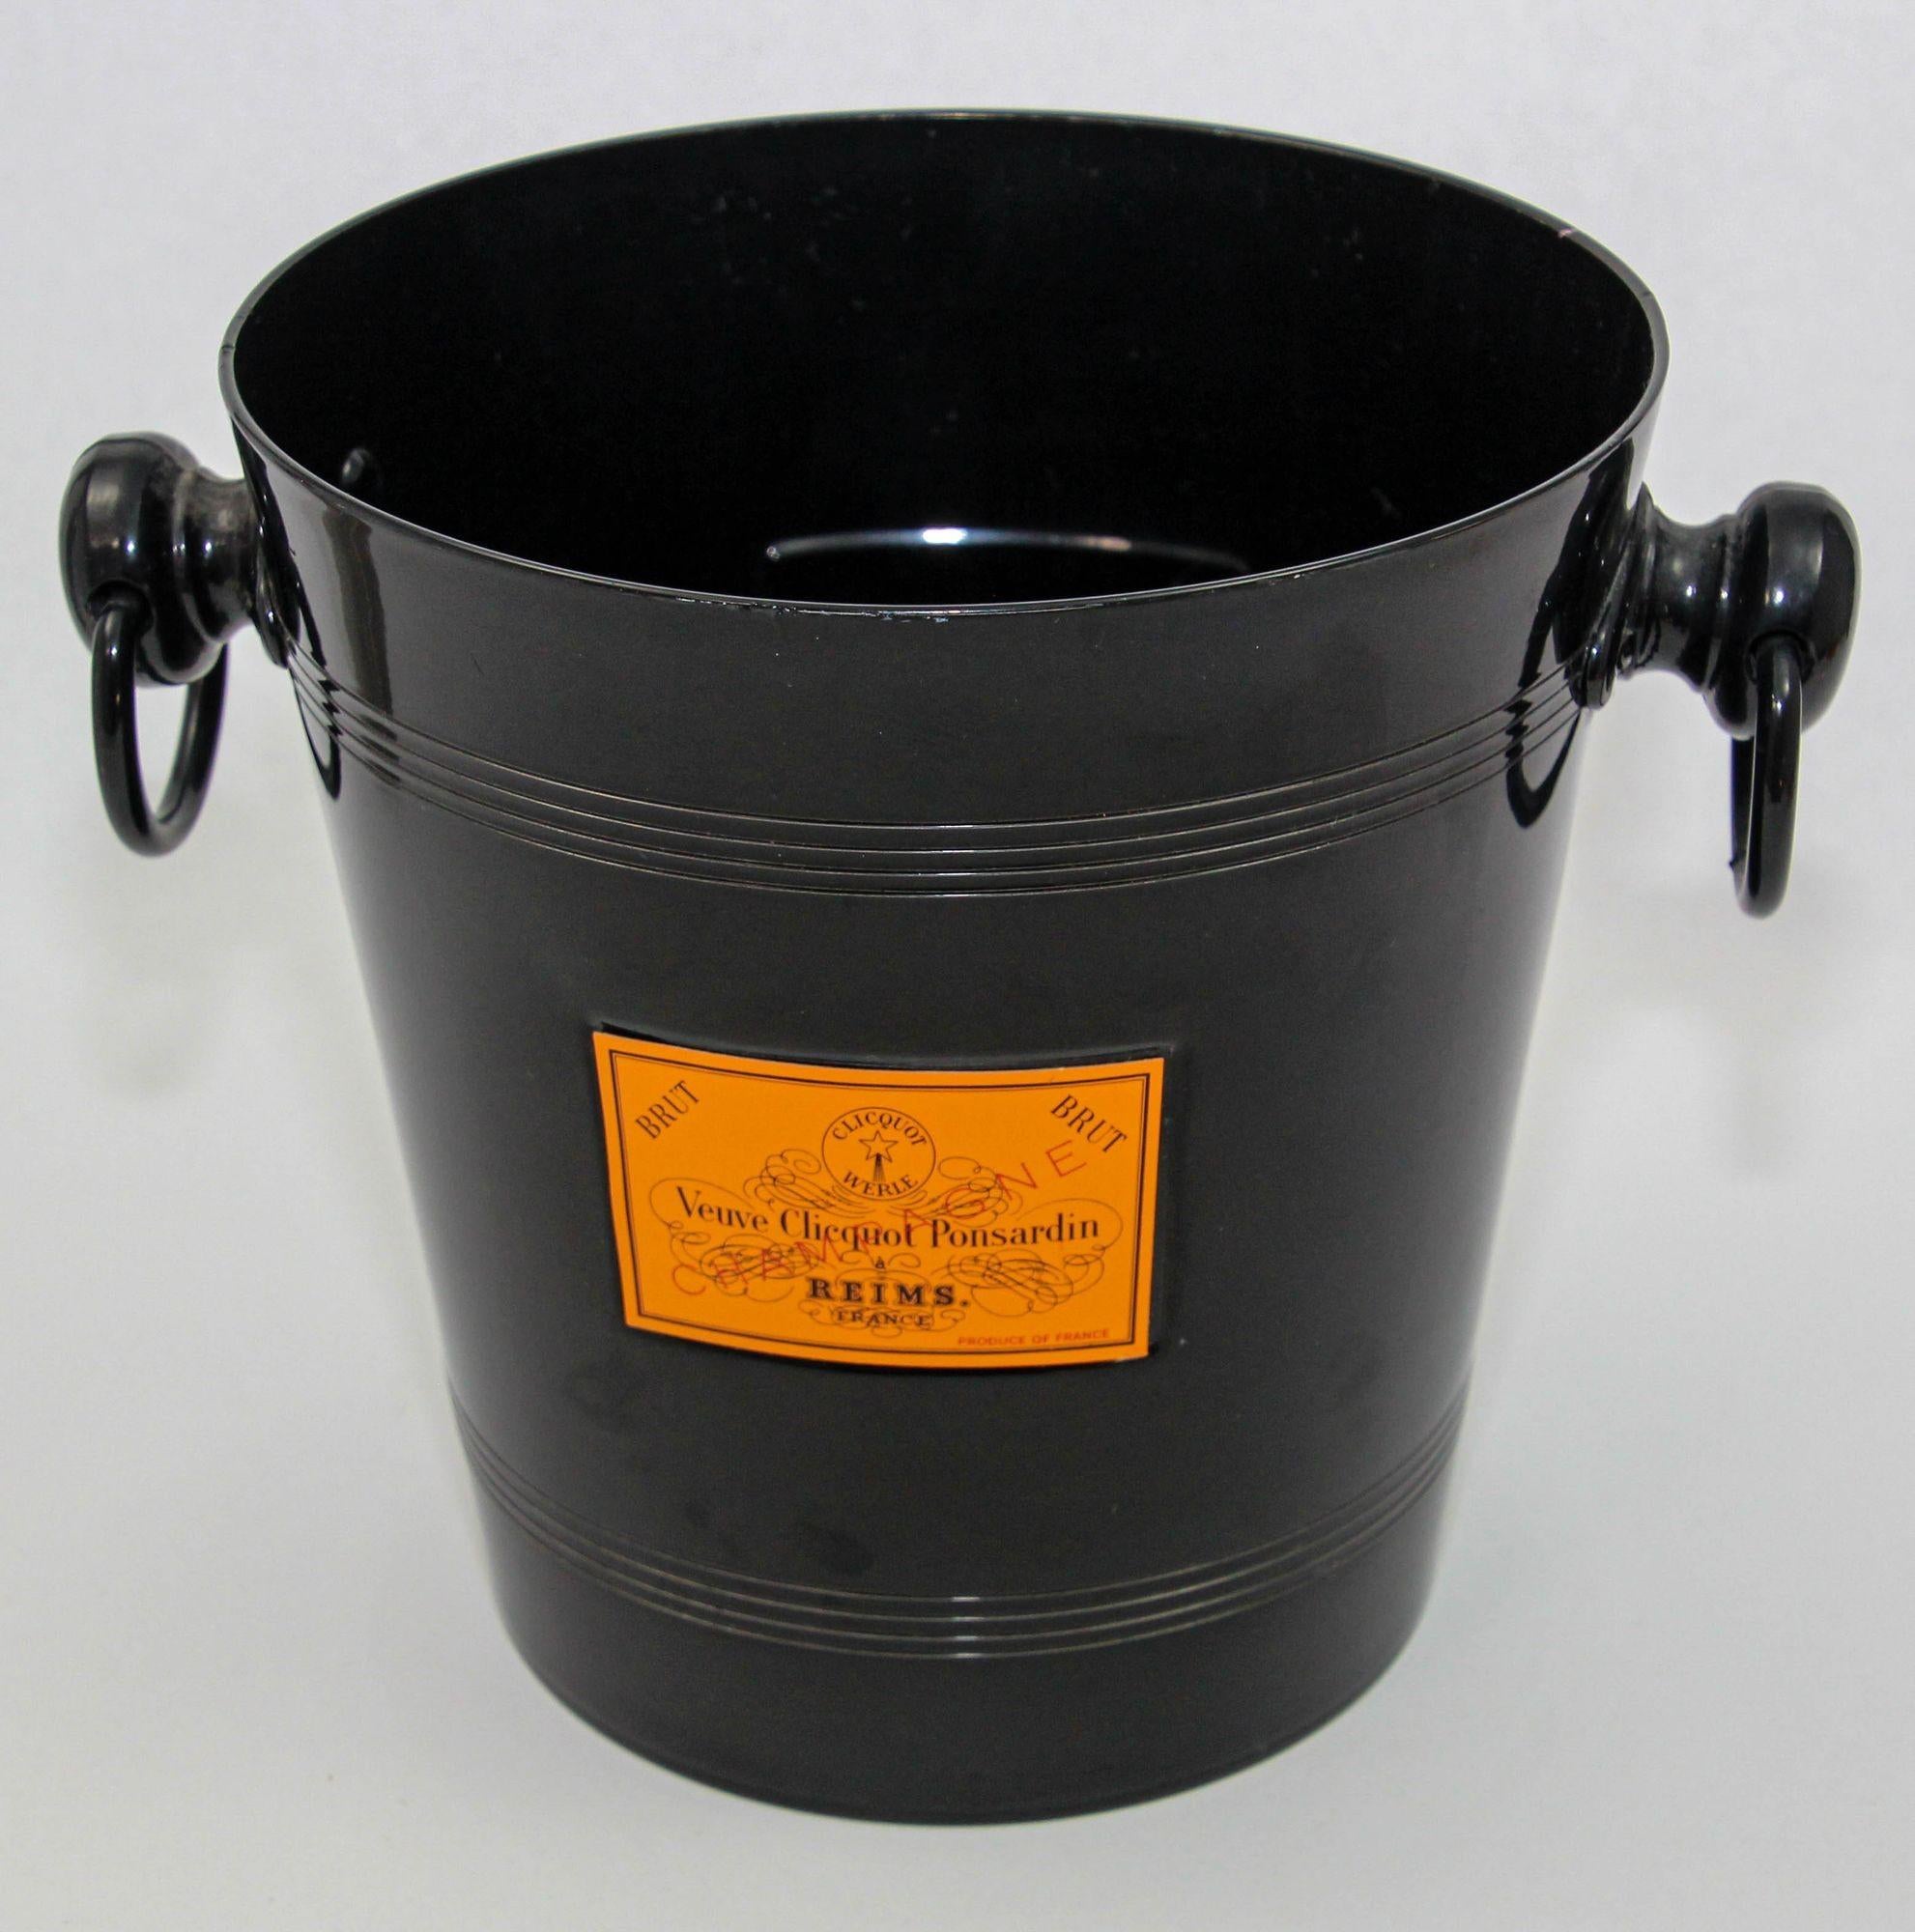 Enameled VEUVE CLICQUOT Black and Orange French Champagne Cooler Bucket 